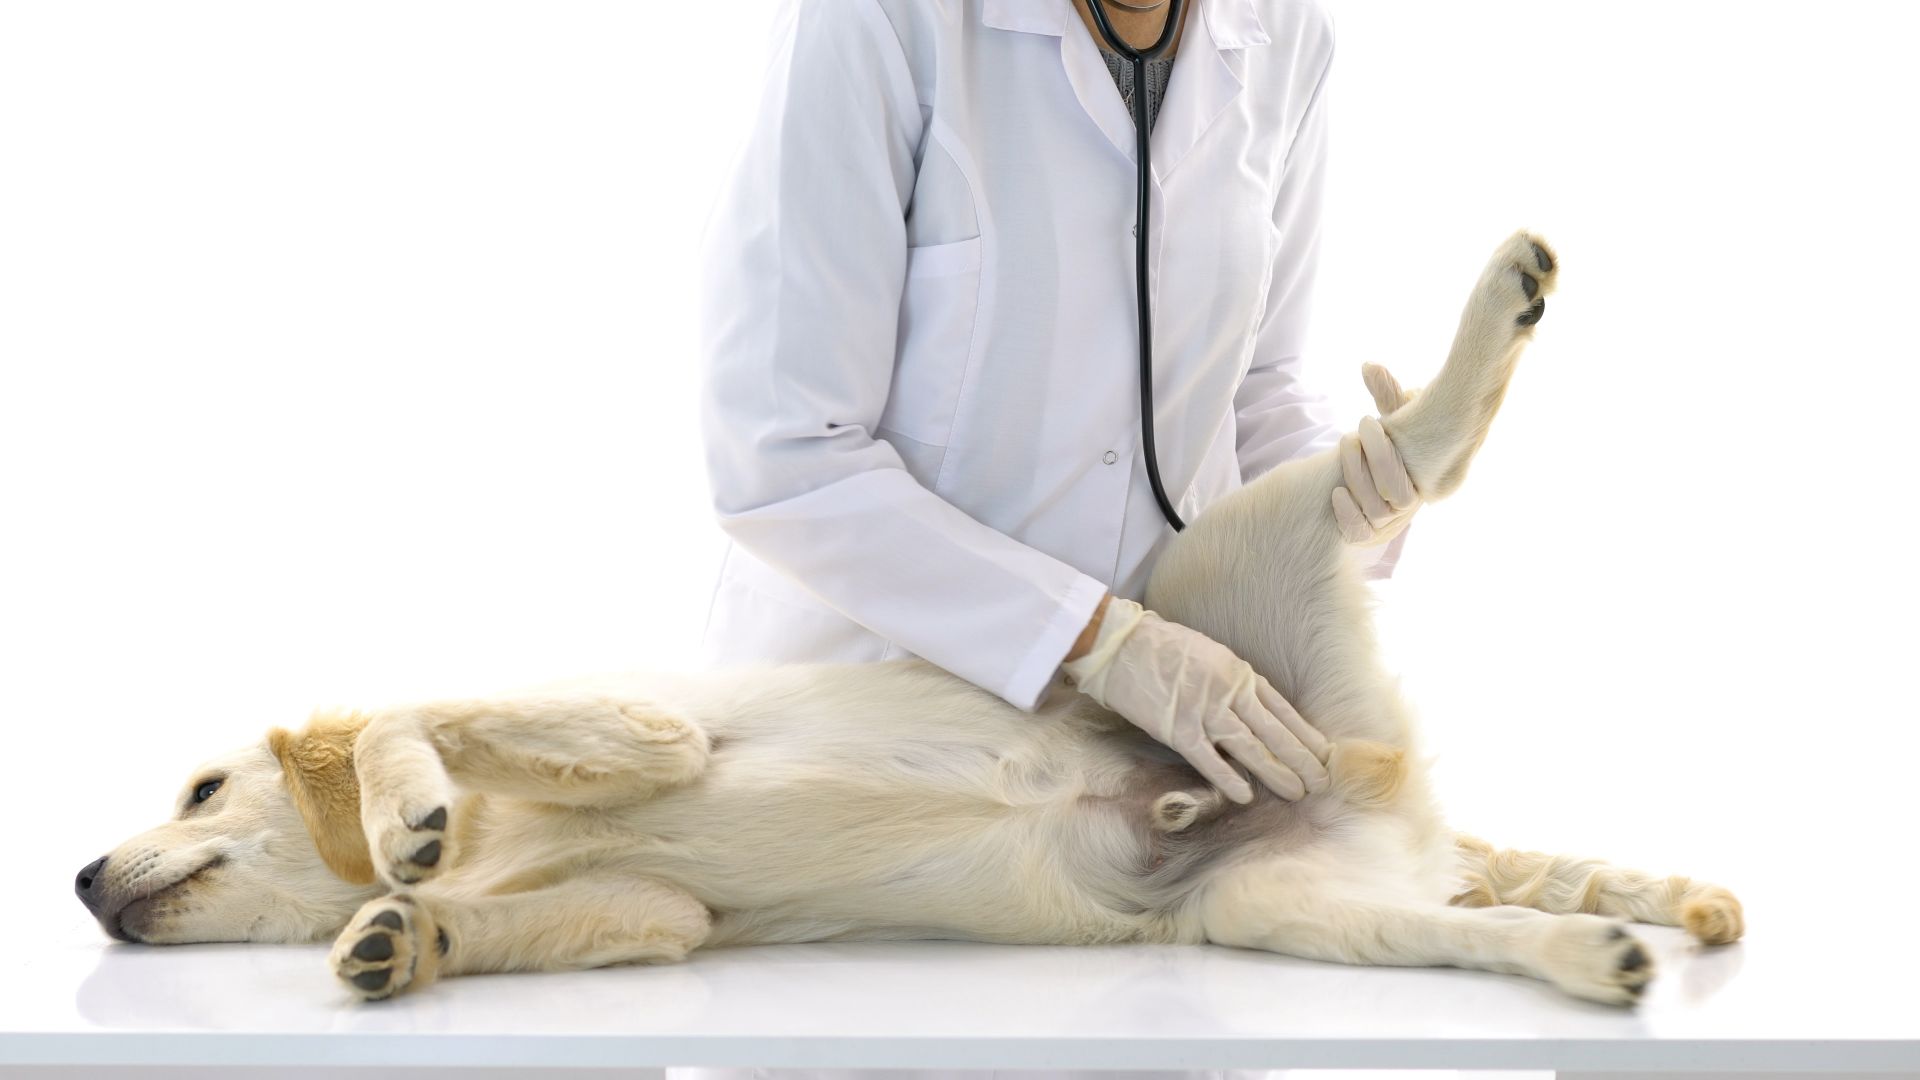 Pet Paraphimosis and Other Animal Reproductive Health Issues